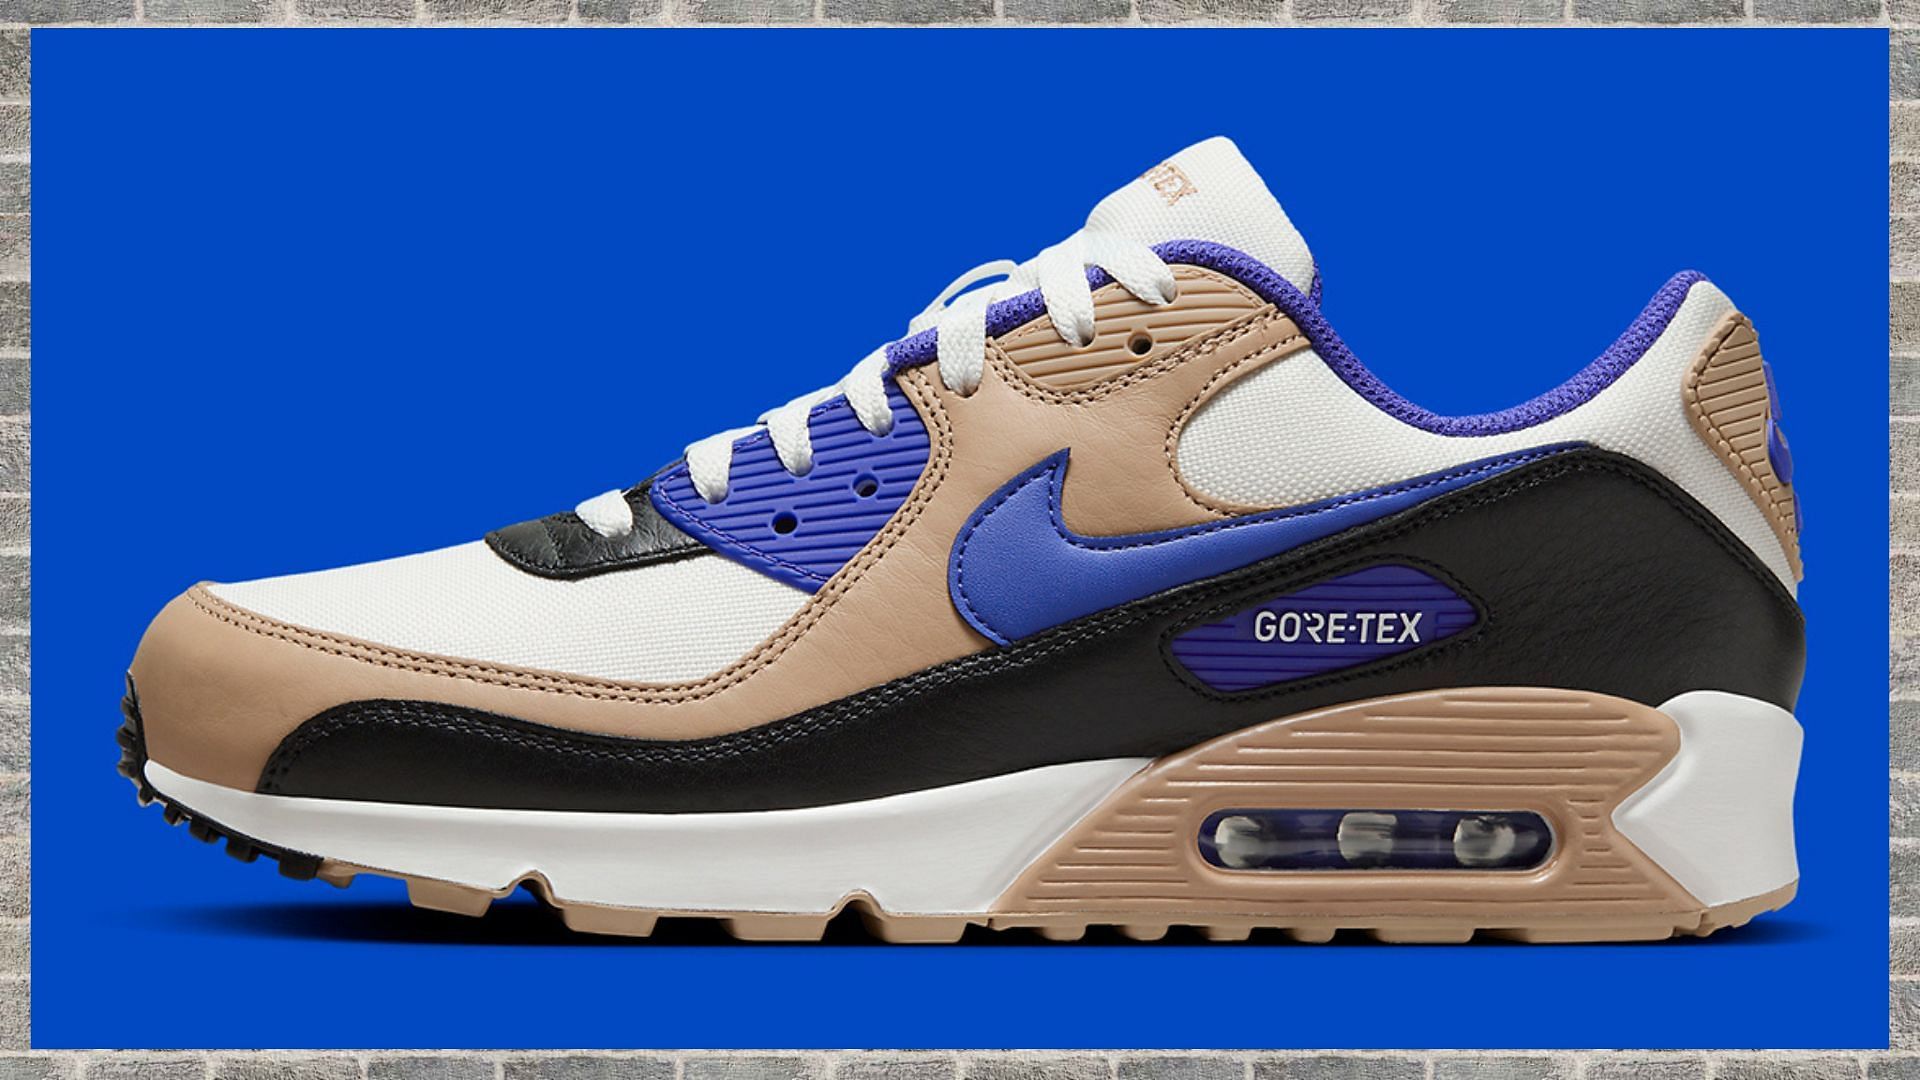 Air Max 90: Nike Air Max 90 GTX “Lapis” shoes: Where to get, price, and ...